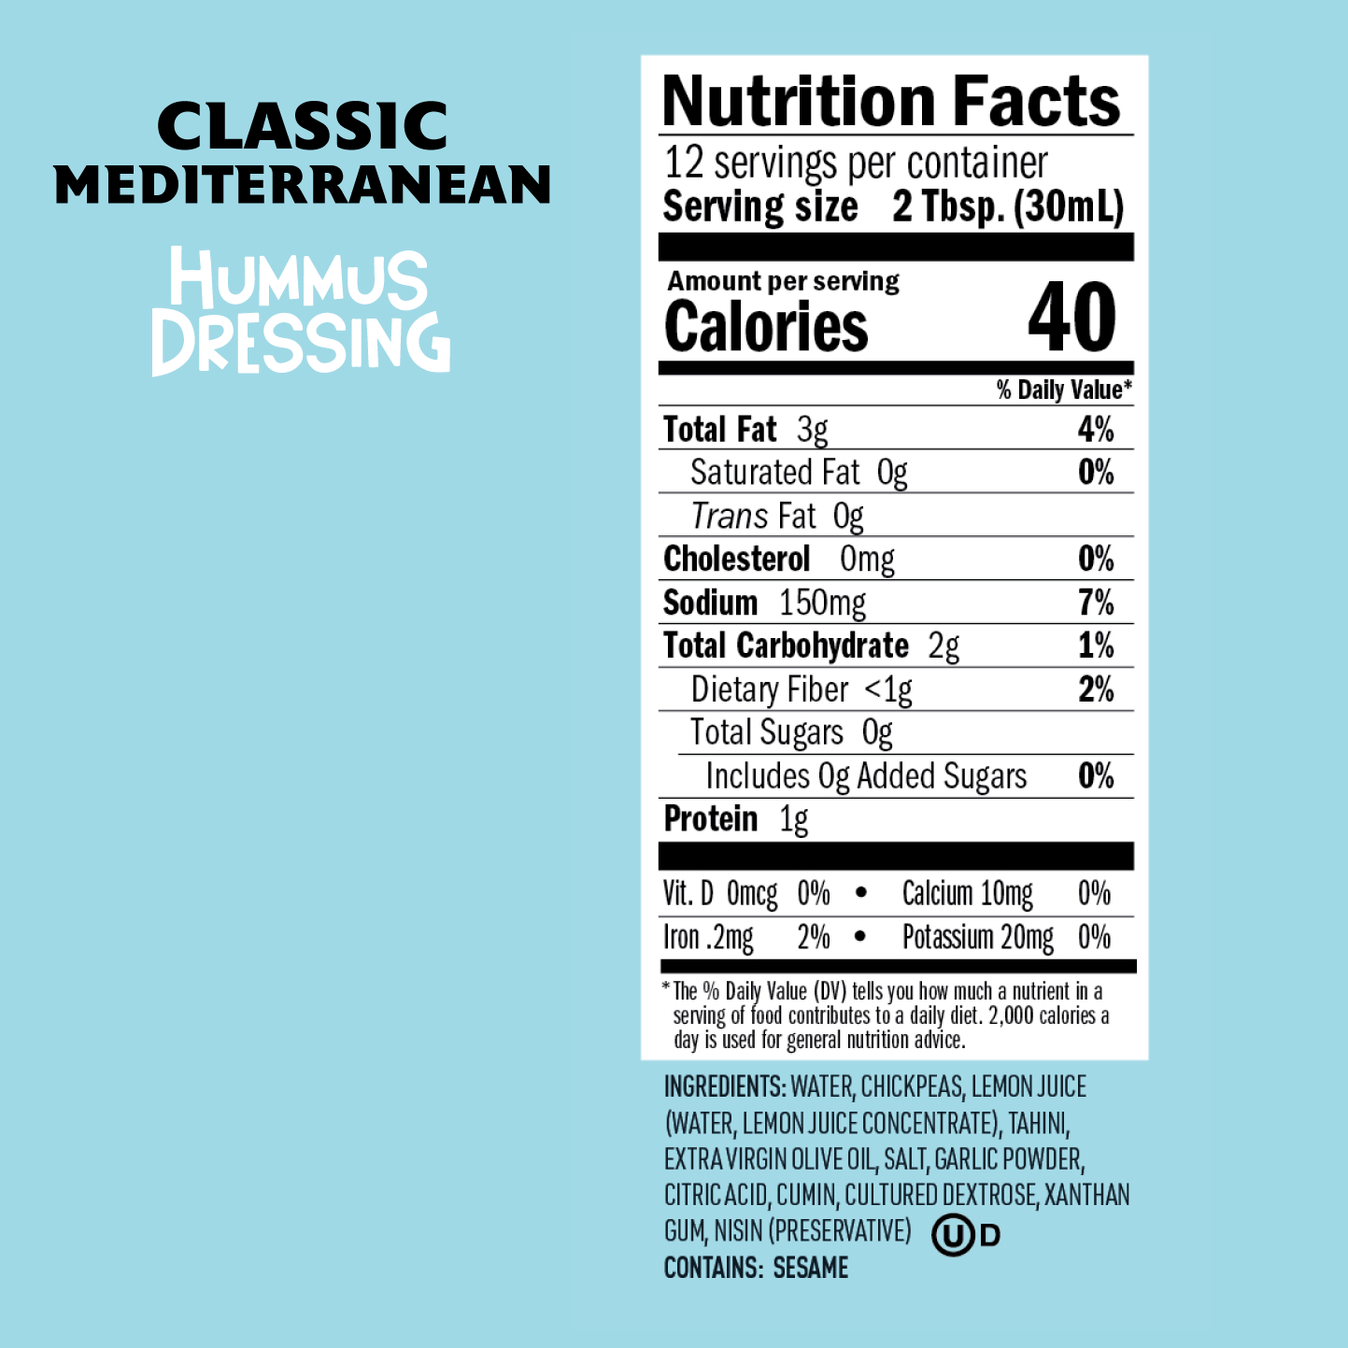 Nutrition facts for classic mediterranean flavor of O'dang Foods brand chickpea condiment. Low calorie, clean label, low fat, and vegan.